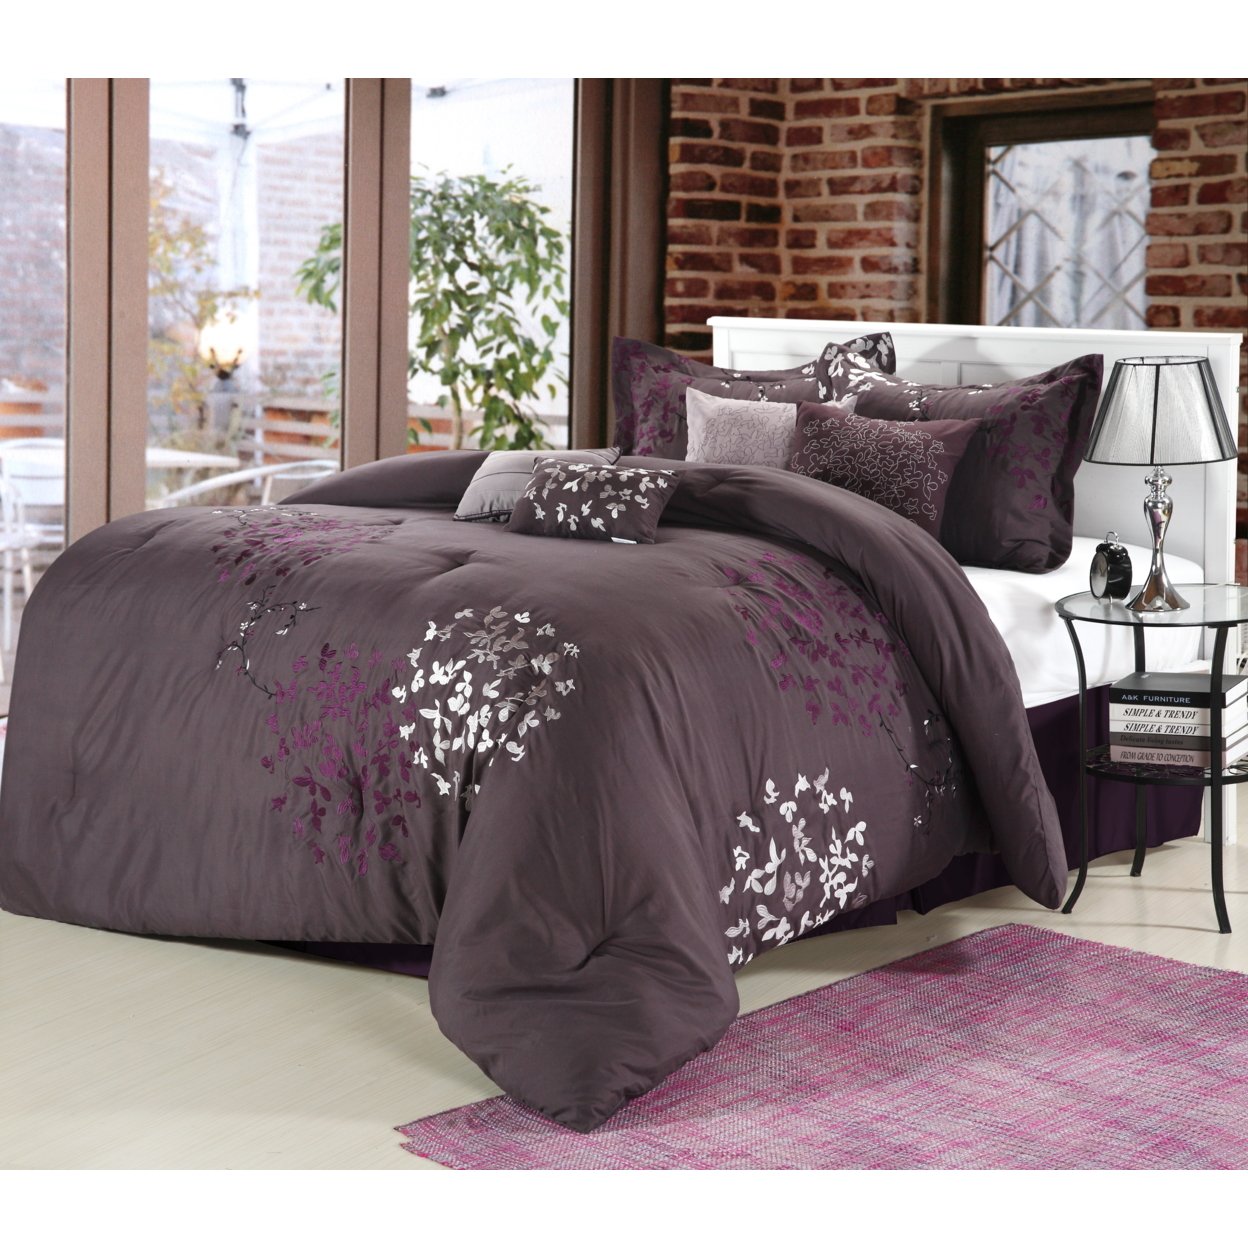 Cheila 8-Piece Embroidered Comforter Set - Plum, King